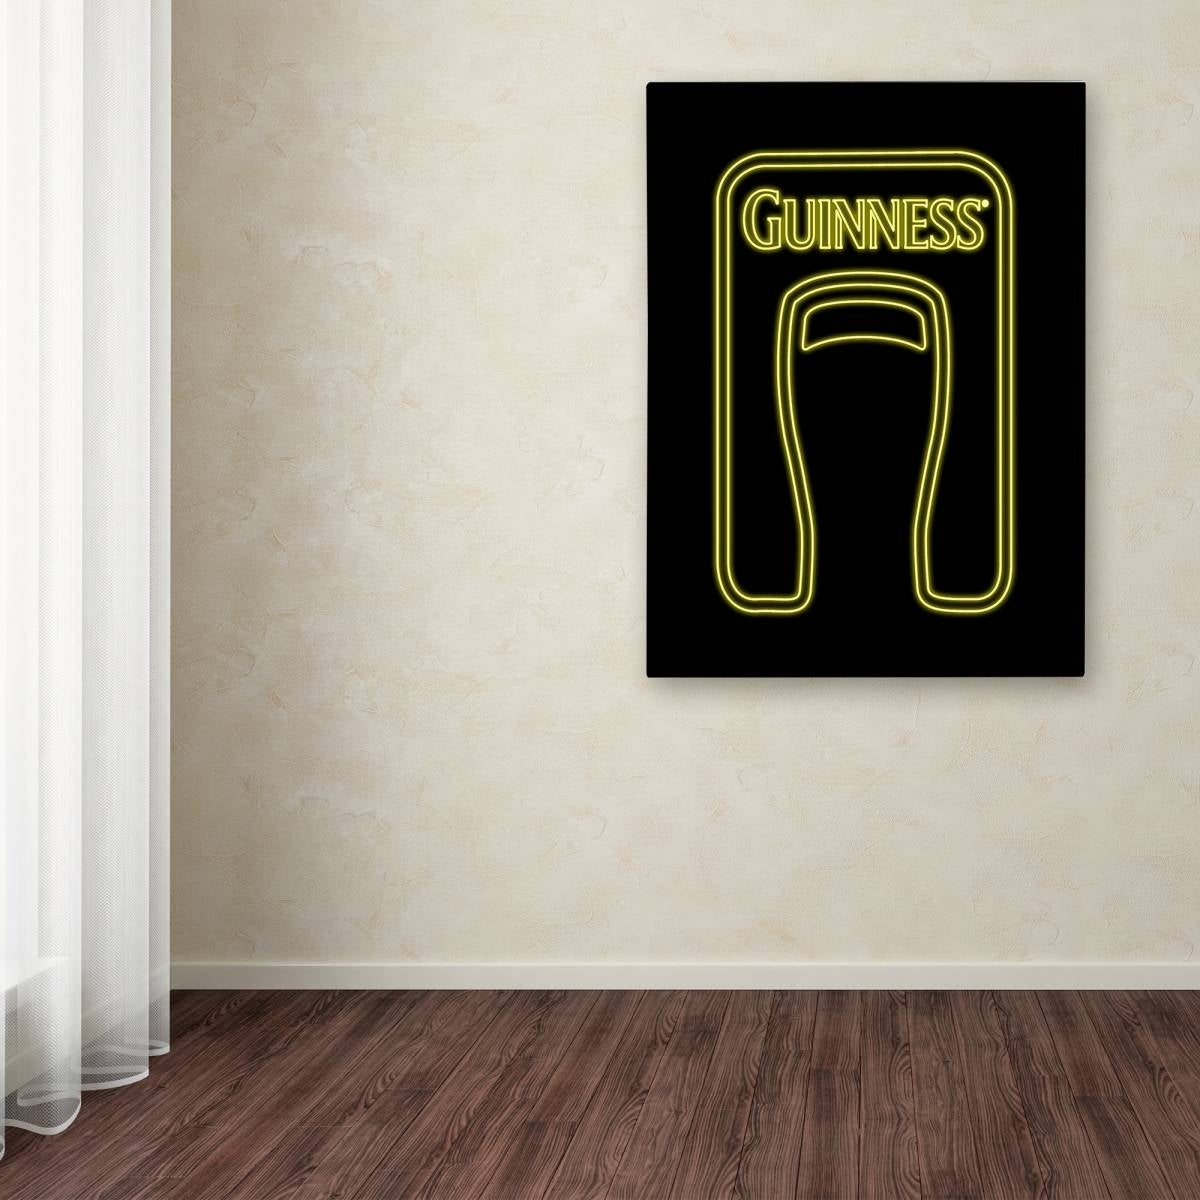 The Guinness Brewery 'Guinness VI' Canvas Art is displayed on a neon wall canvas.